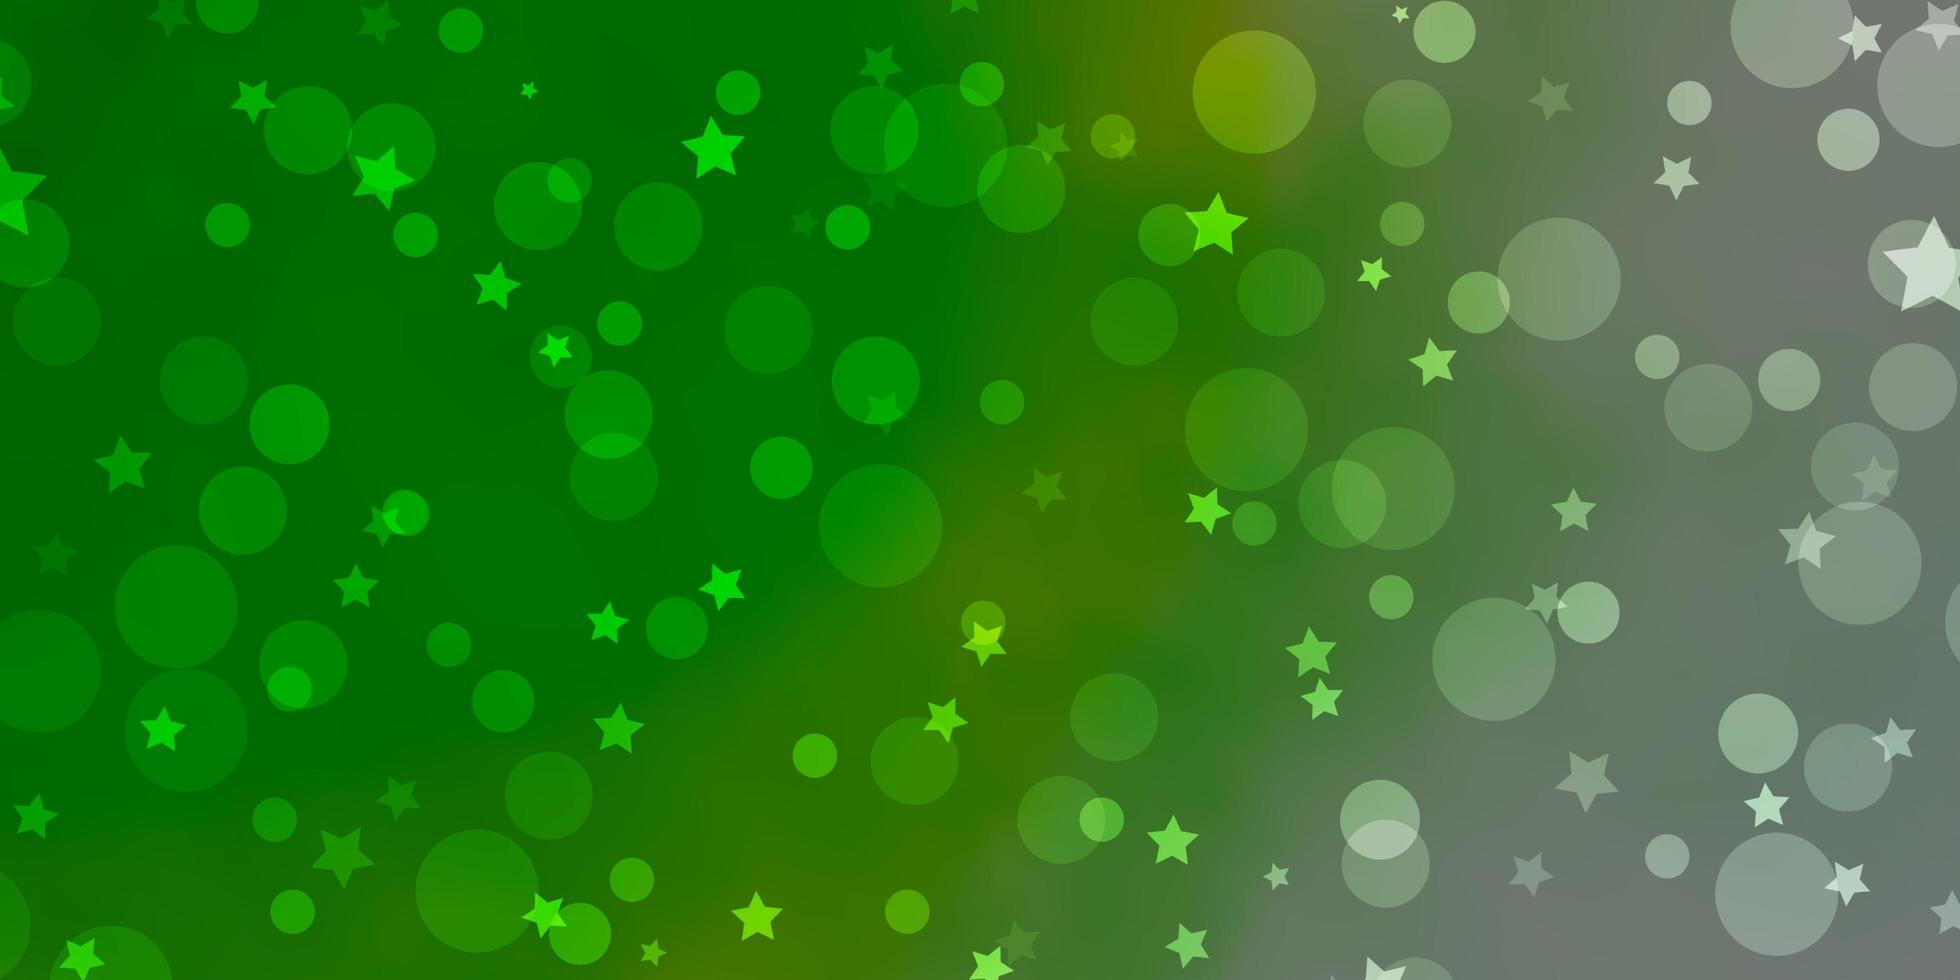 Light Green background with circles, stars. vector